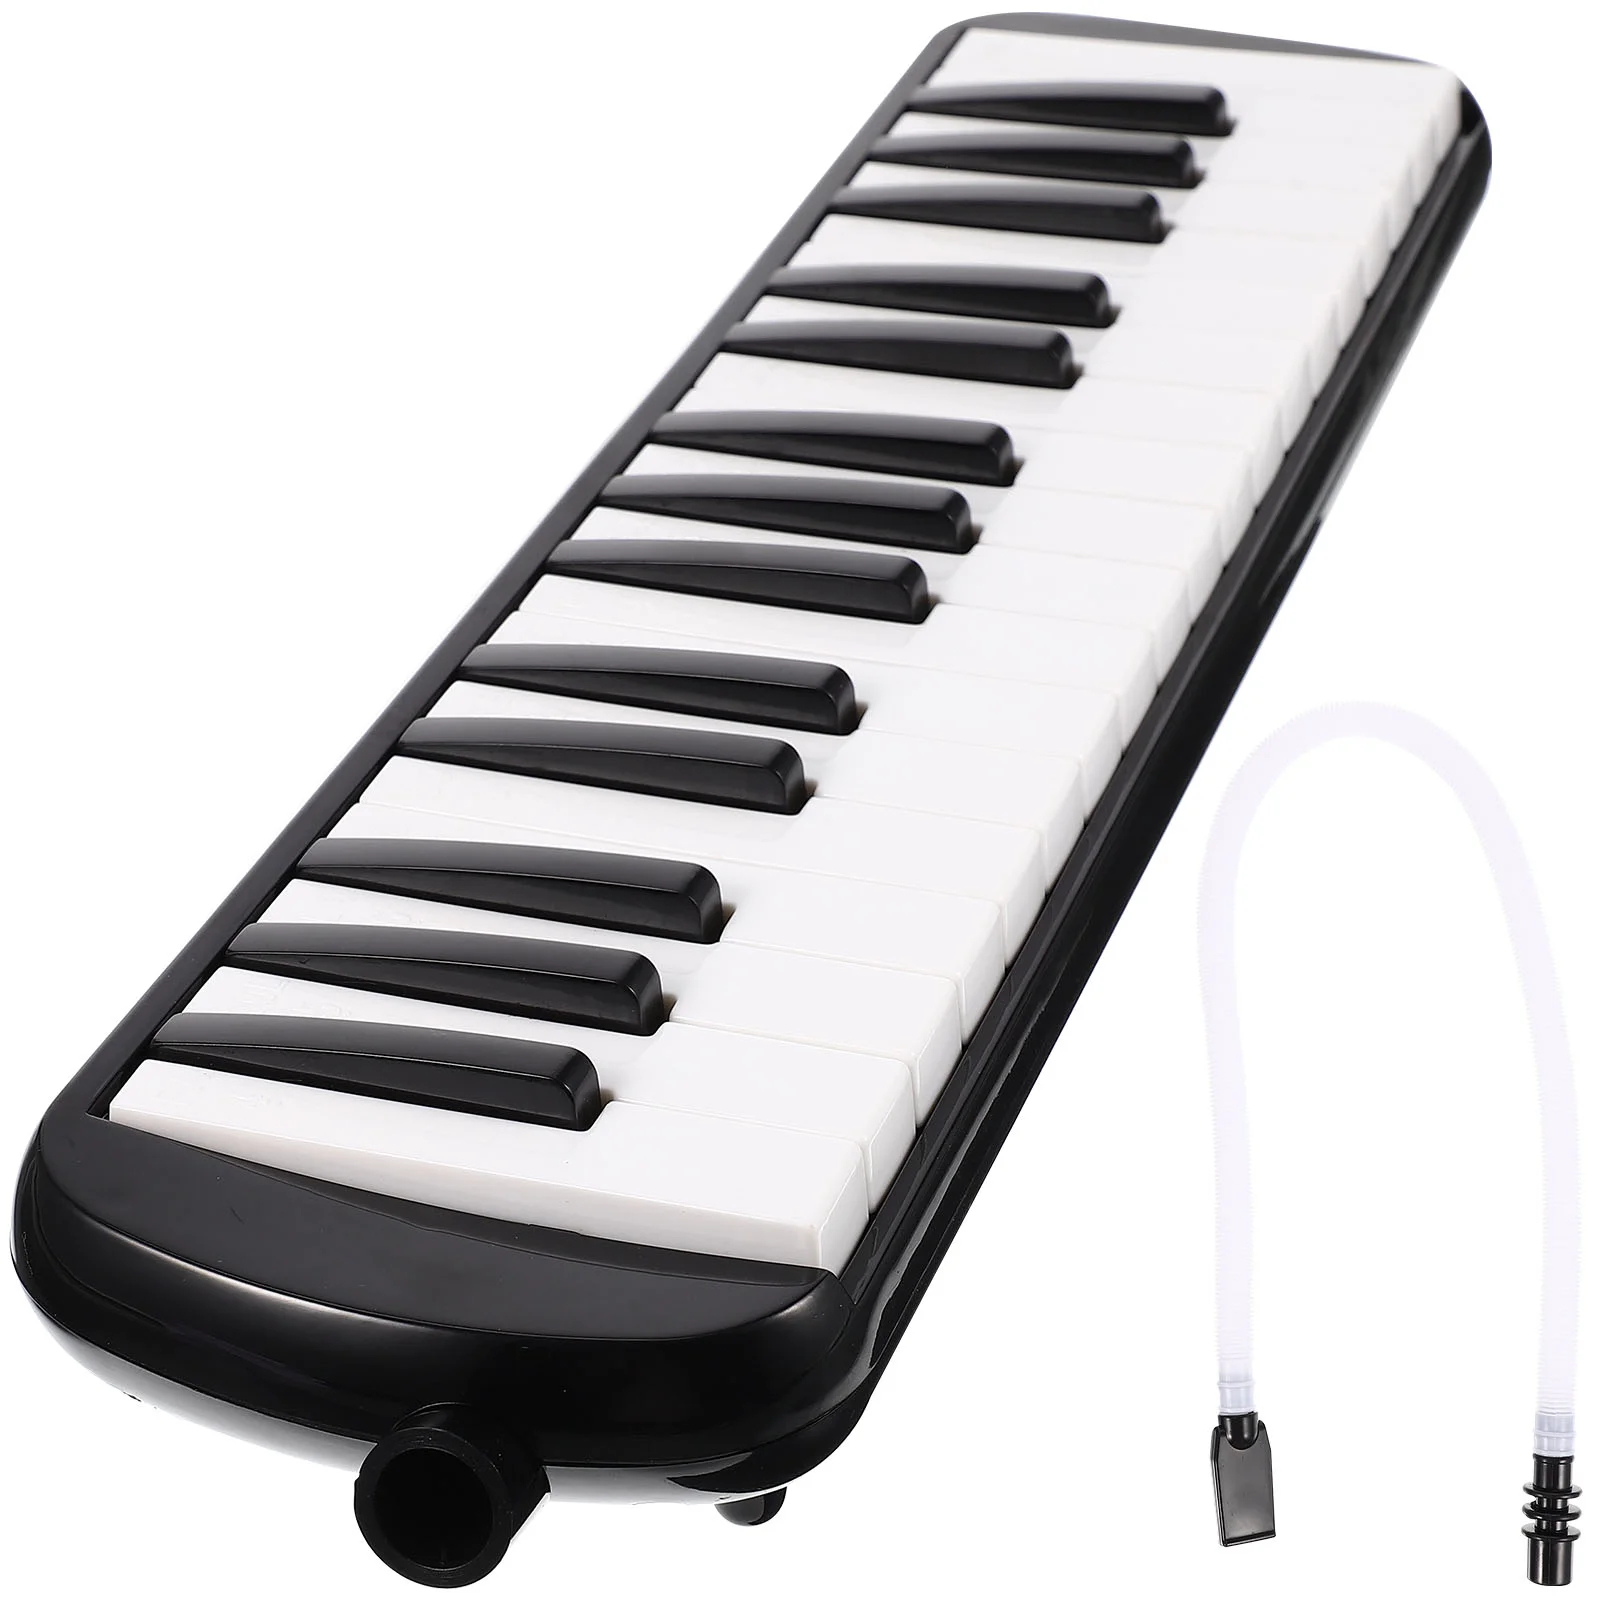 

Melodicakids Instrument Beginners Children Piano Instrumentsprofessional Mouthpieces Keys Toy Key Air Musical Enlightenment